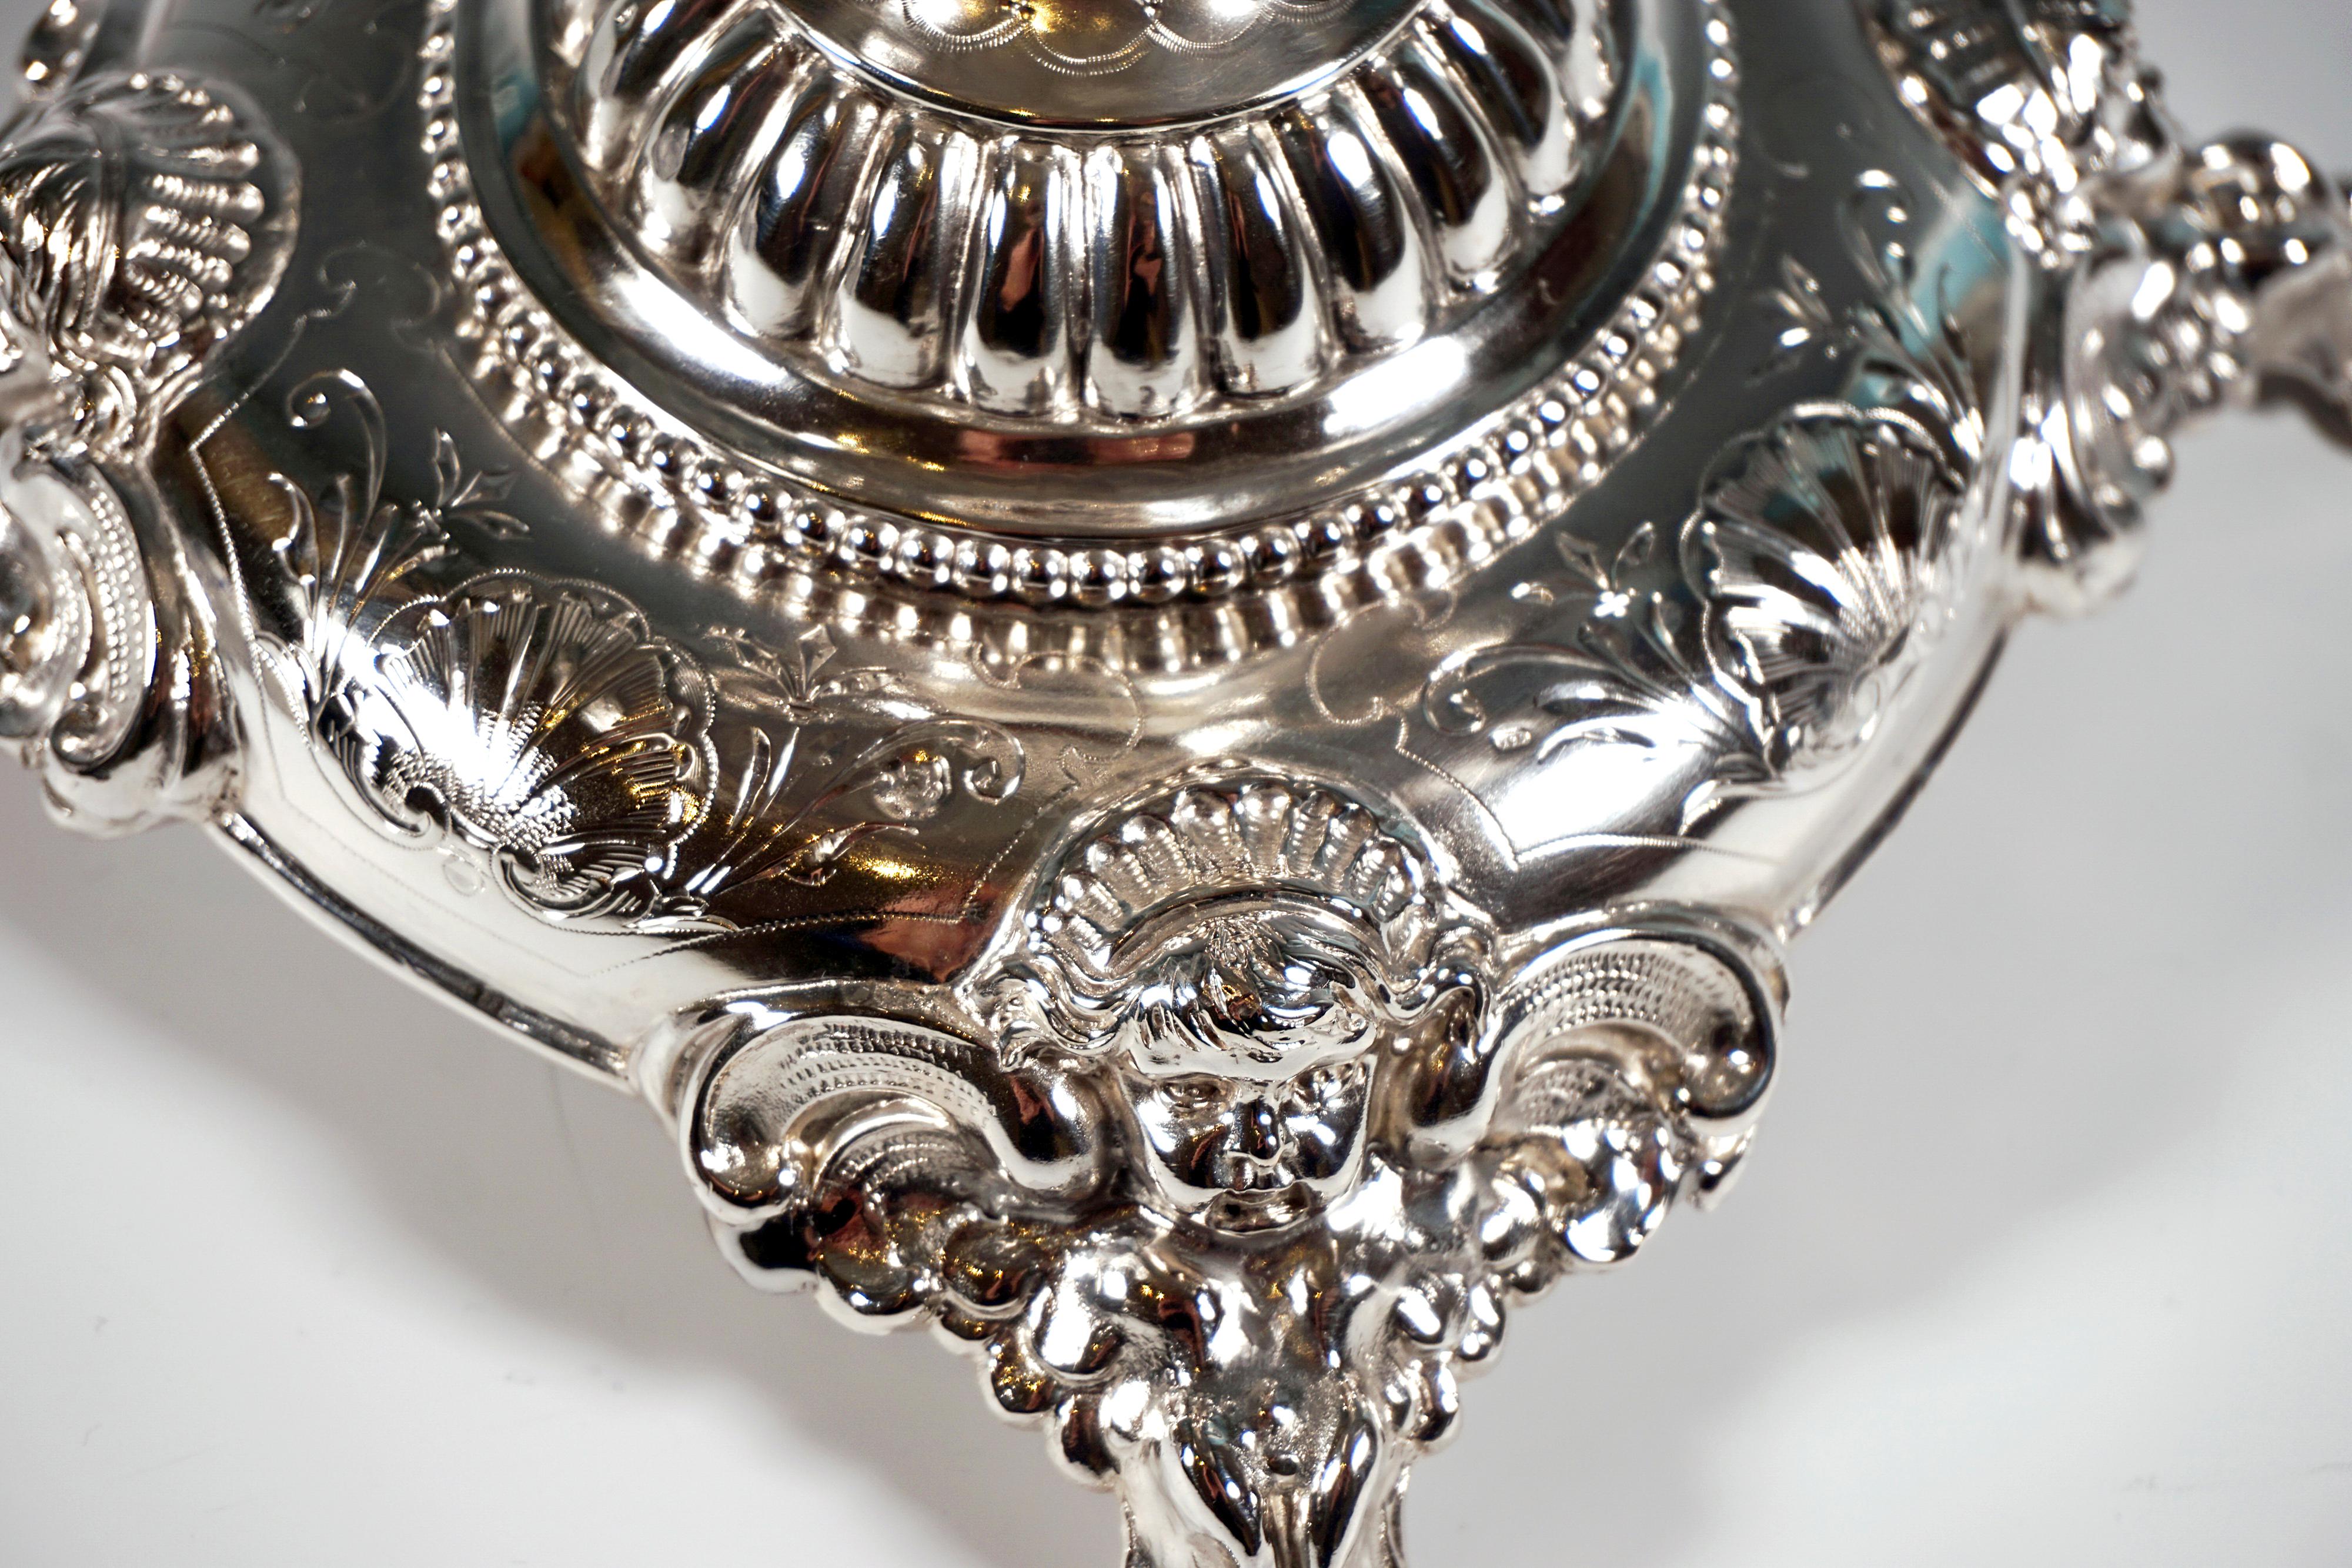 Early 20th Century Viennese Art Nouveau Silver Centerpiece With Original Glass Bowl, Around 1900 For Sale